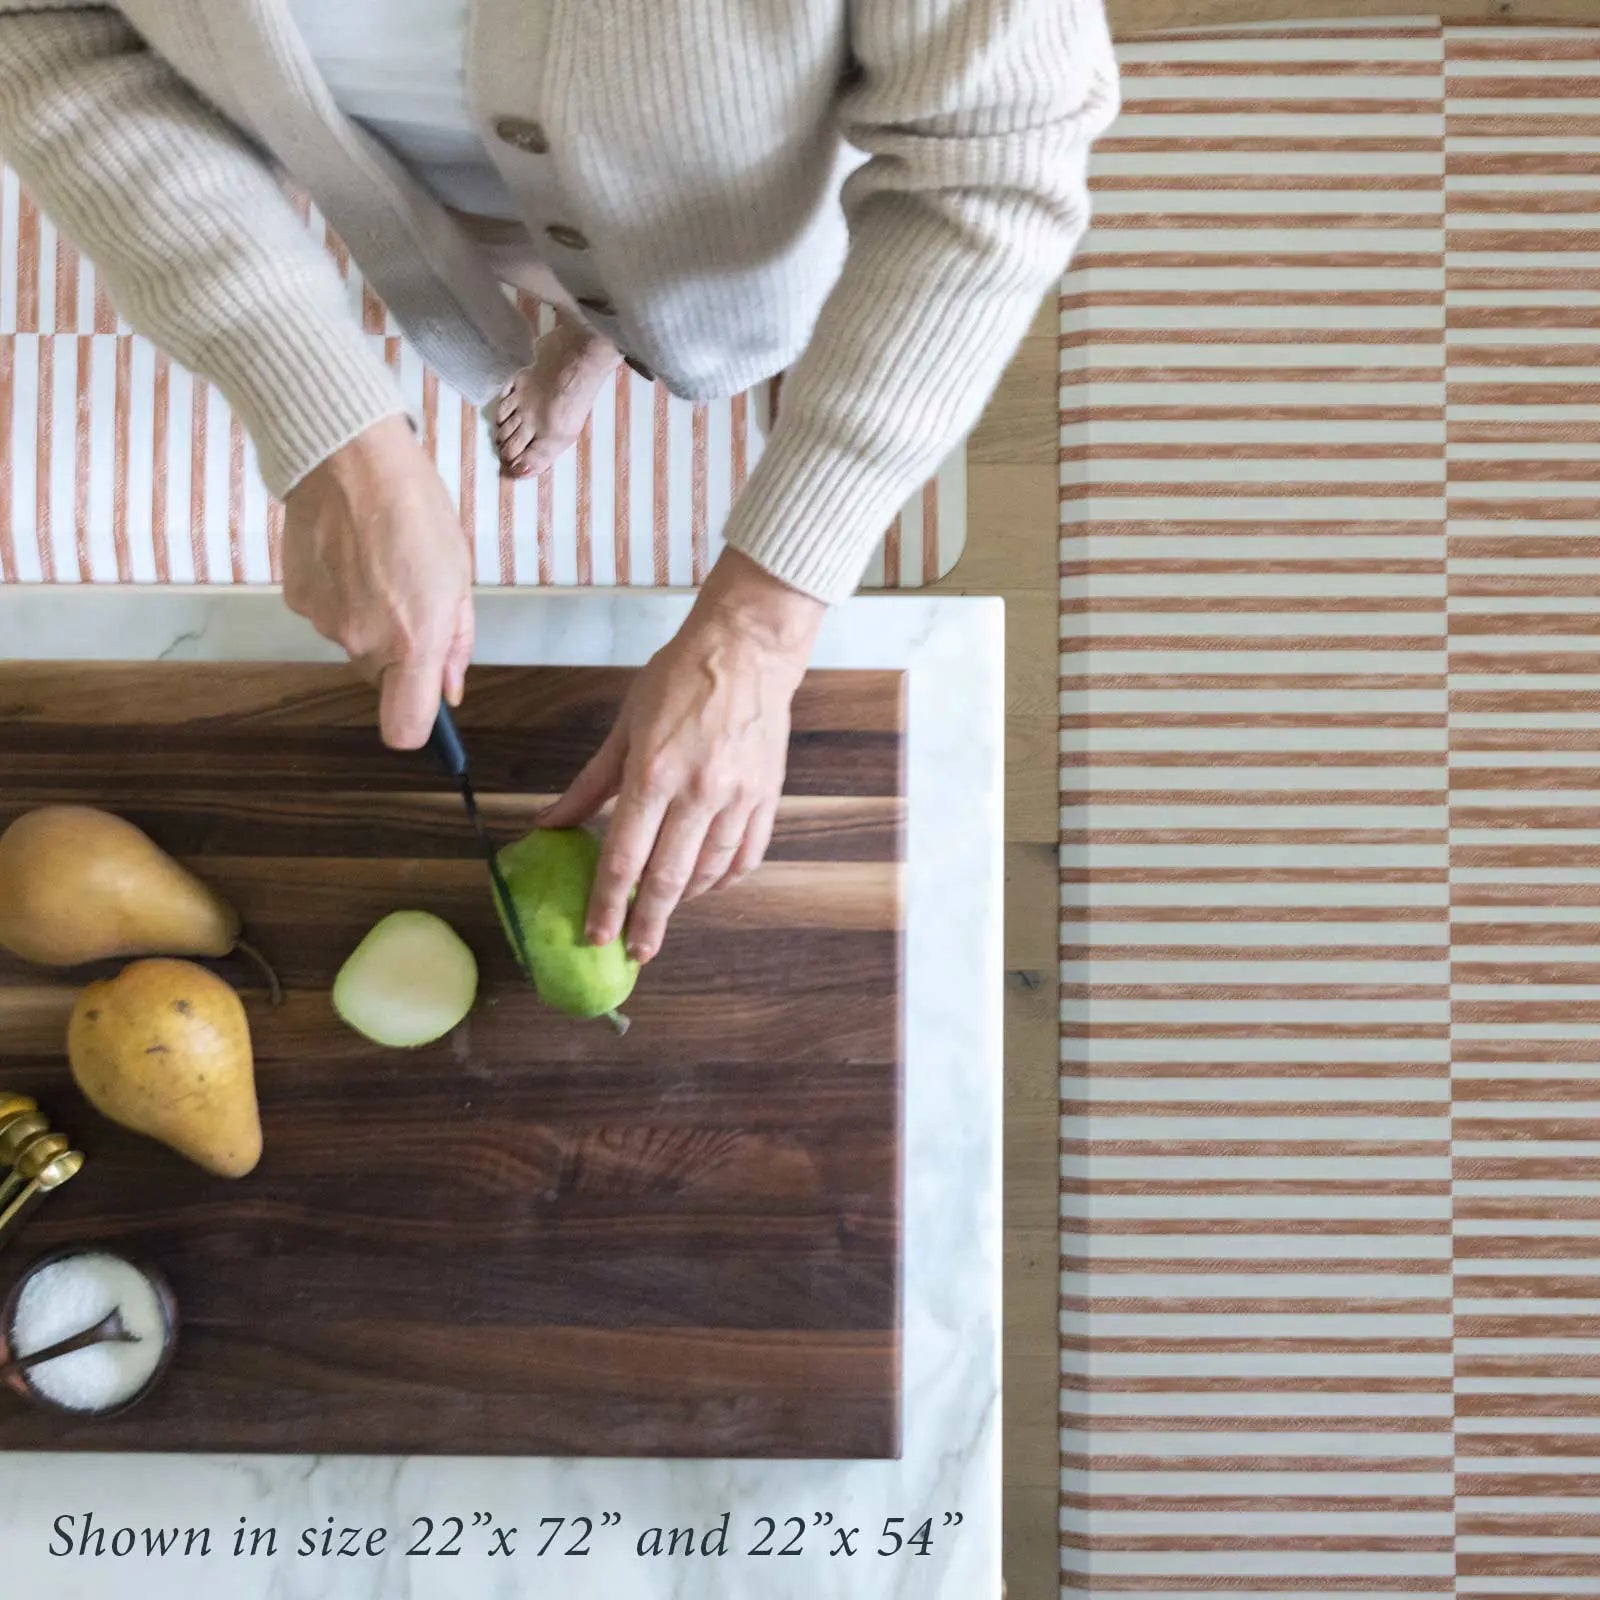 Reese terracotta brown and white inverted stripe standing mat shown from above in kitchen in sizes 22x54 and 22x72 with woman cutting pears